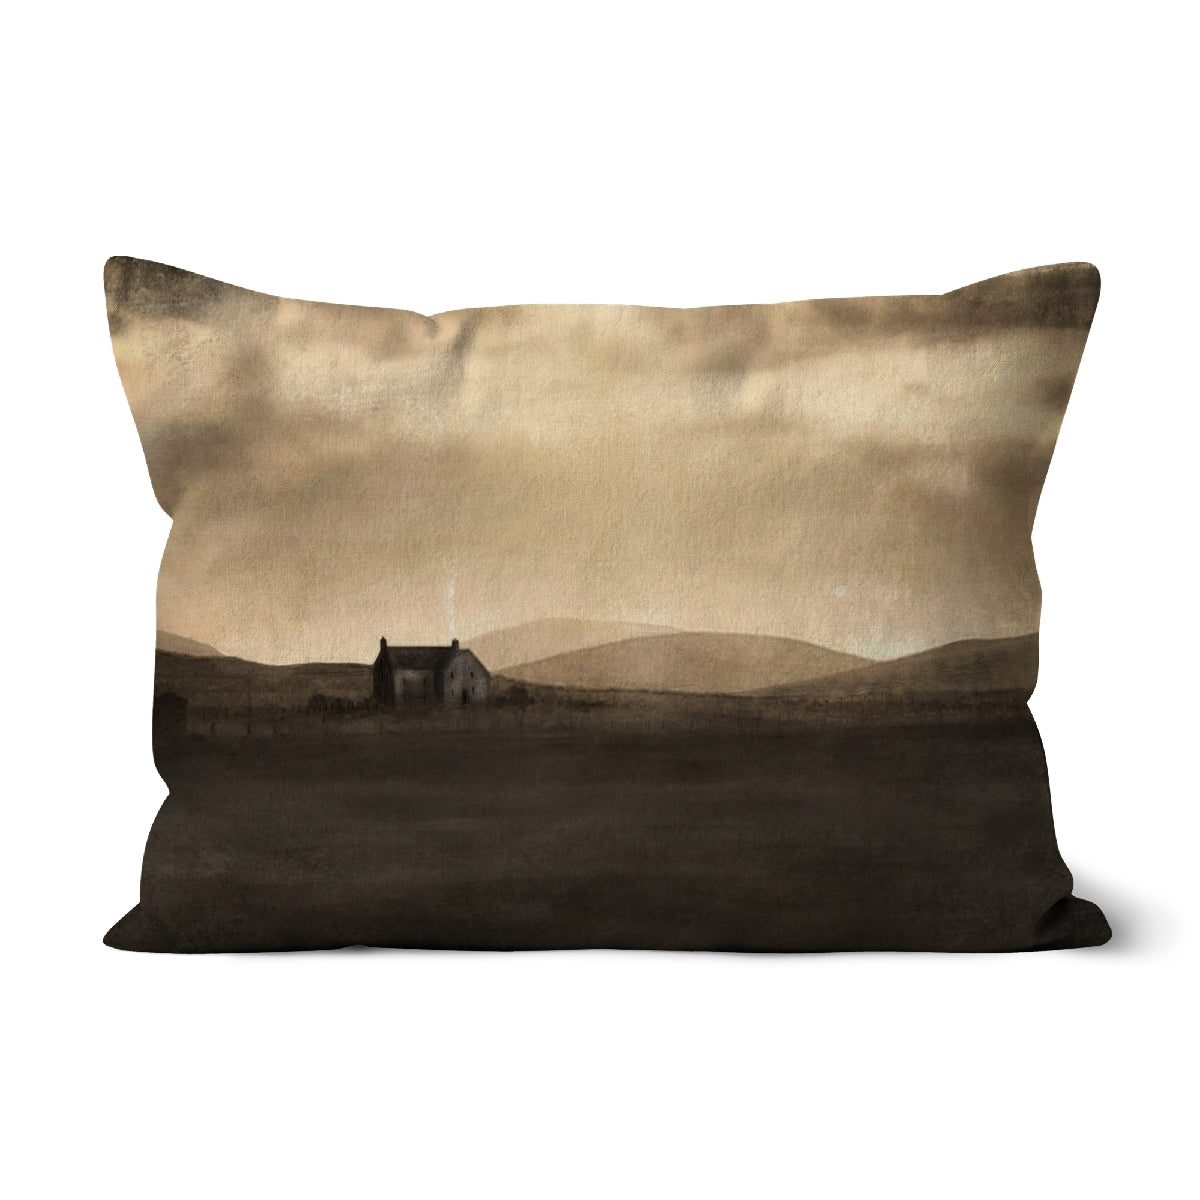 A Moonlit Croft Art Gifts Cushion-Cushions-Hebridean Islands Art Gallery-Canvas-19"x13"-Paintings, Prints, Homeware, Art Gifts From Scotland By Scottish Artist Kevin Hunter